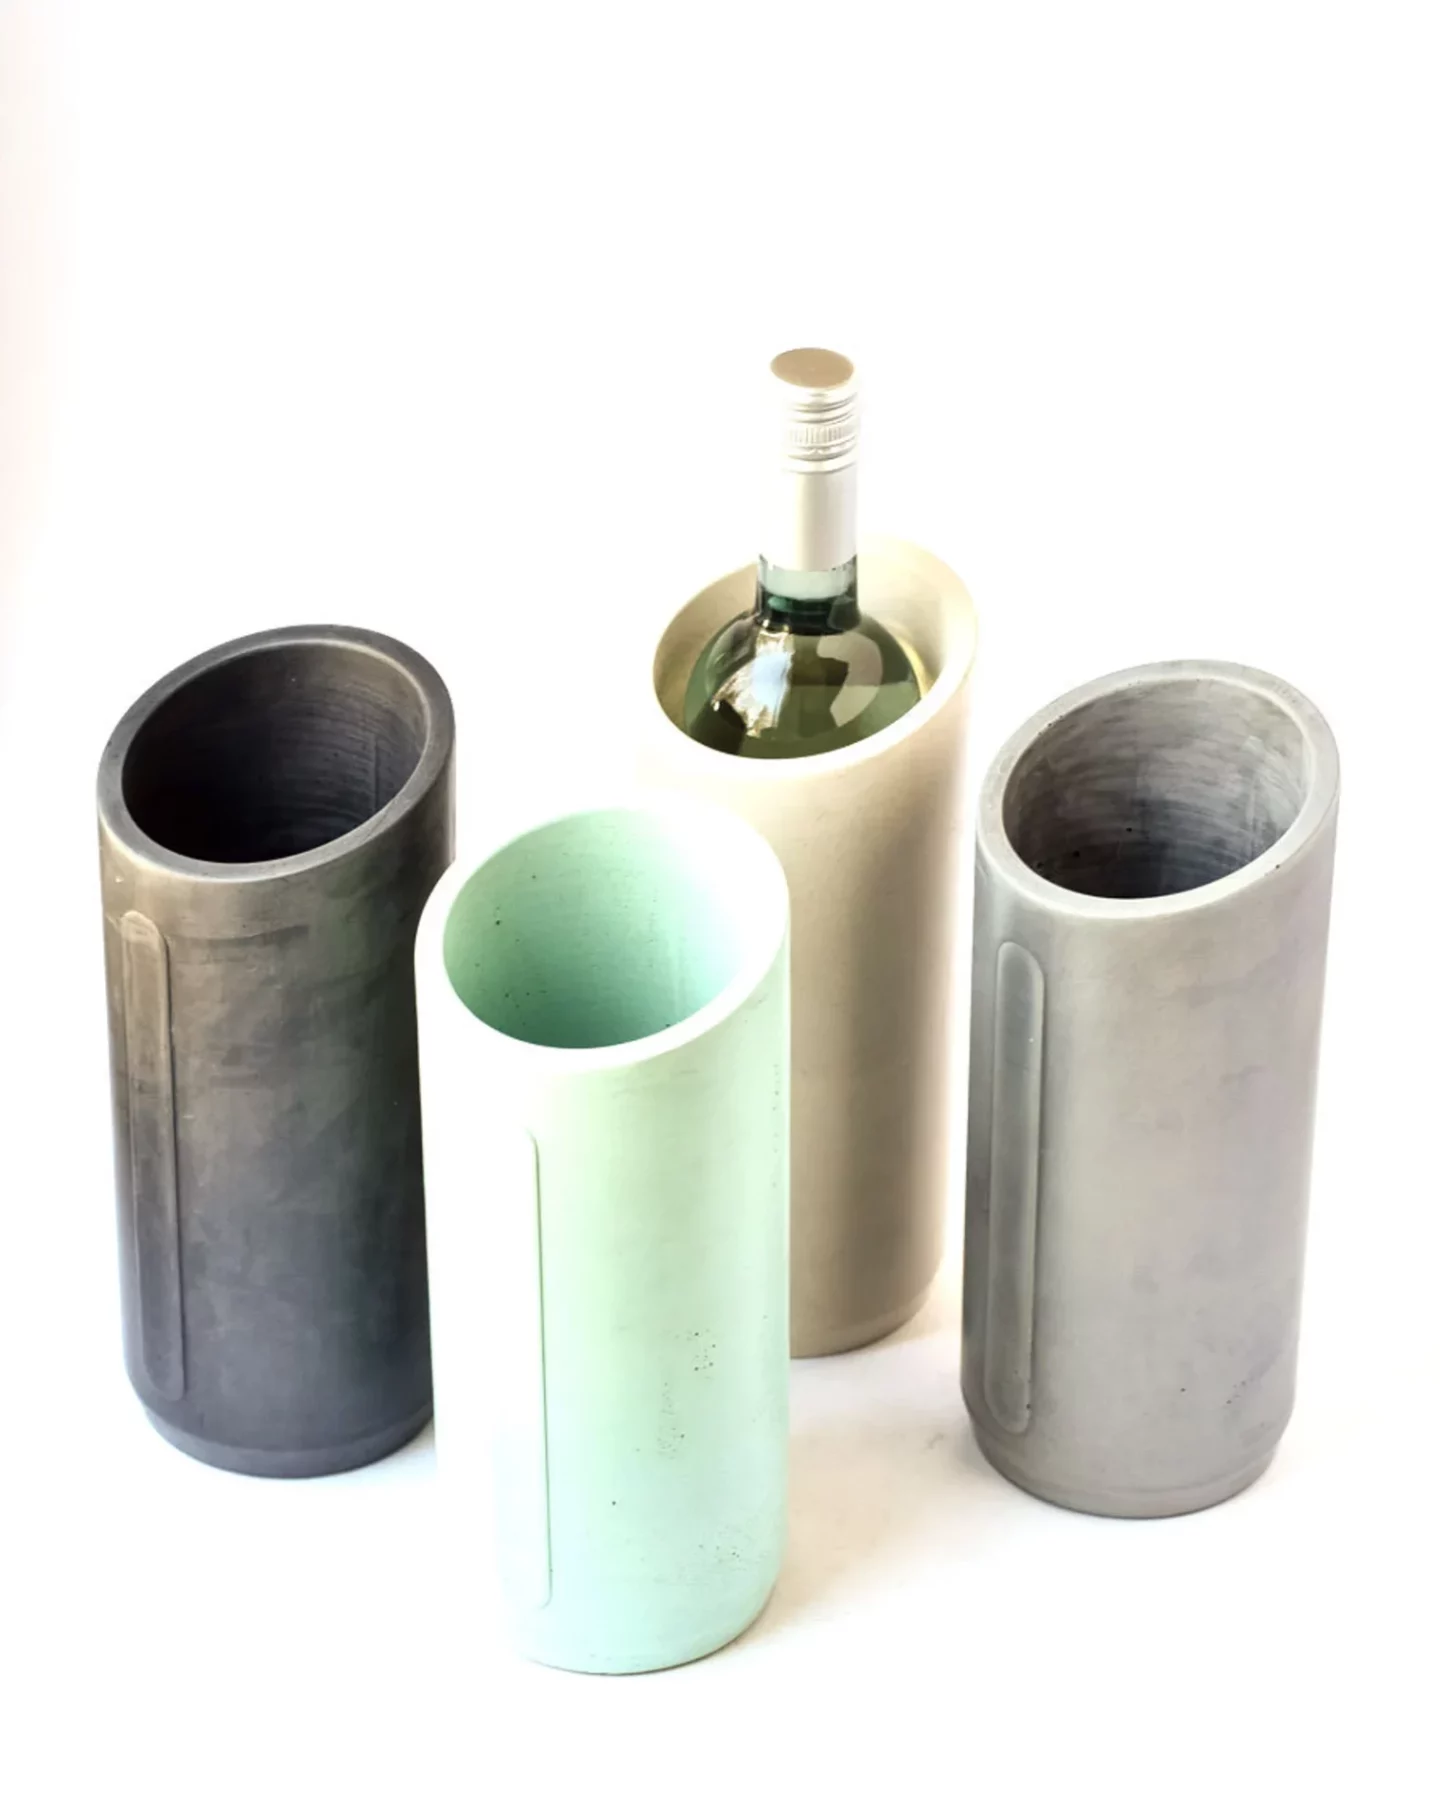 Four concrete wine chillers in varying colors